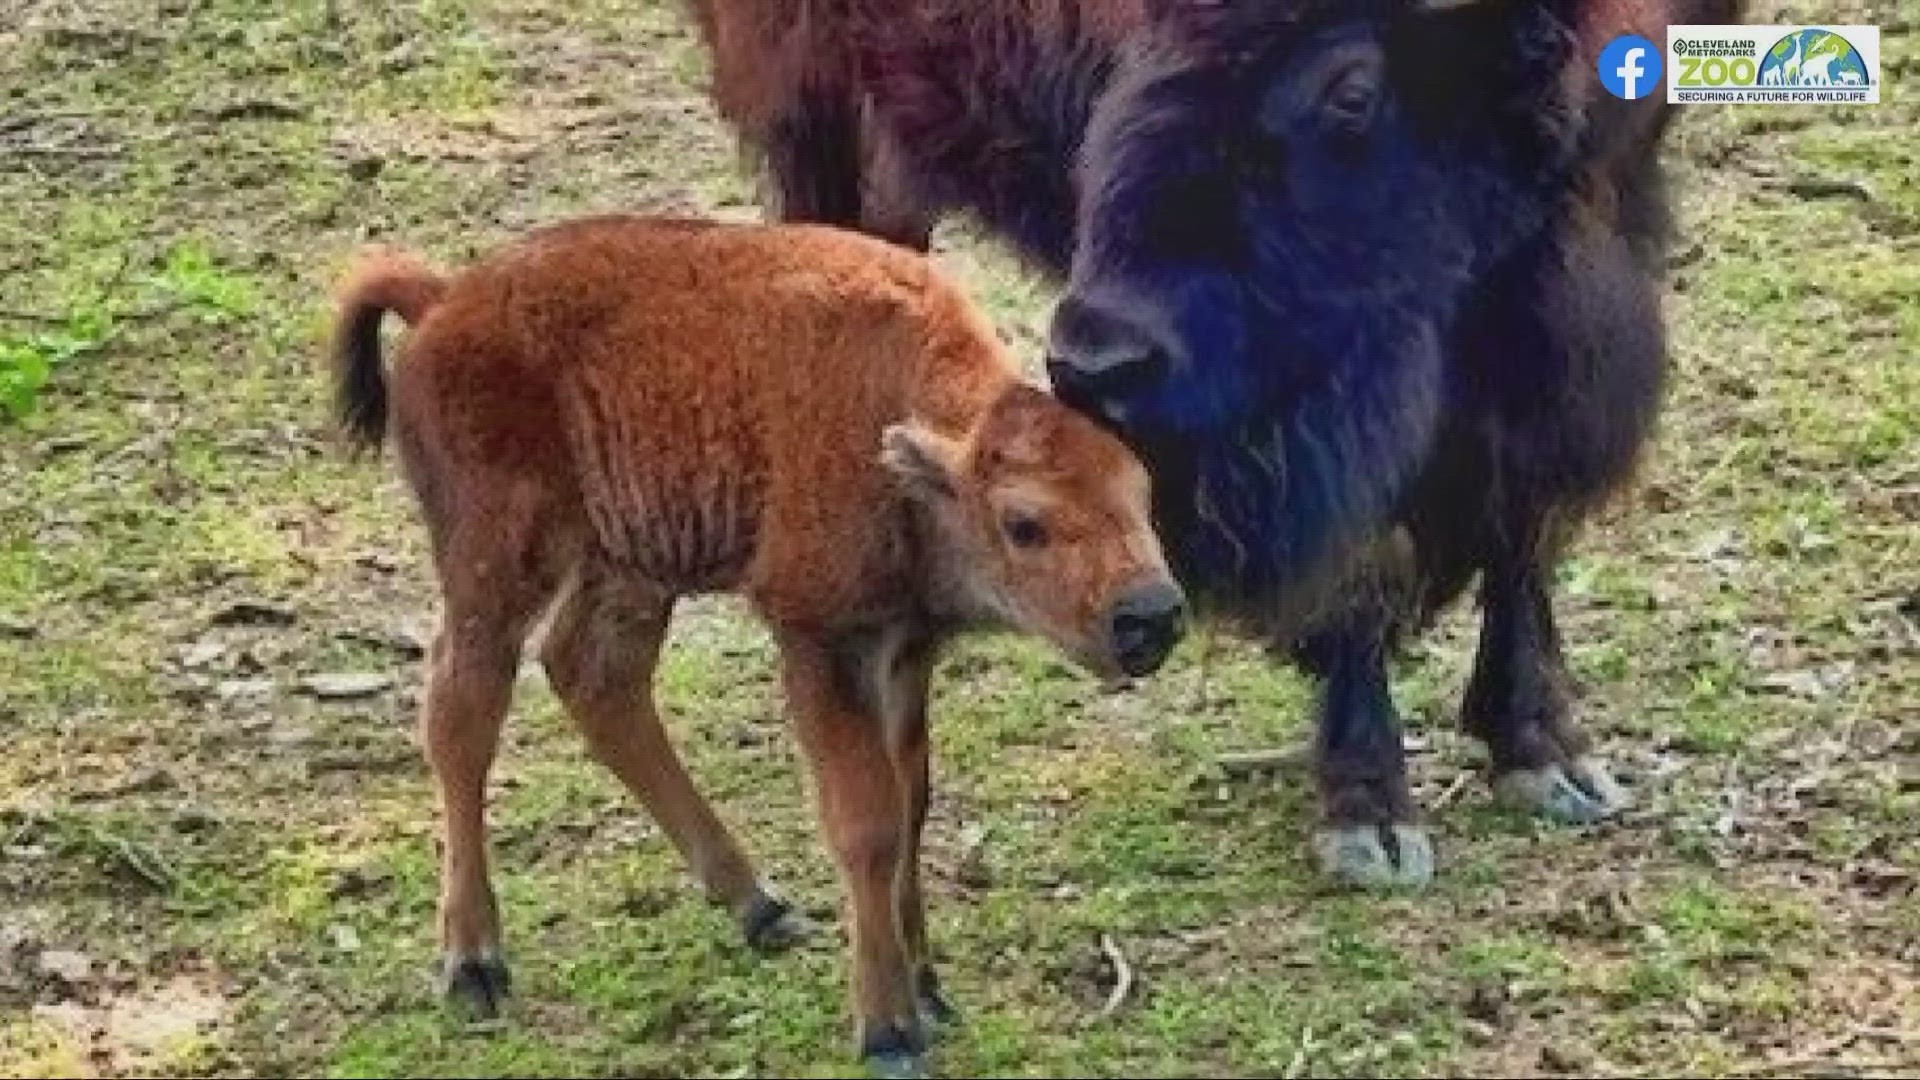 The Cleveland Metroparks Zoo has announced a new addition to its family of bison -- and you can help name him.